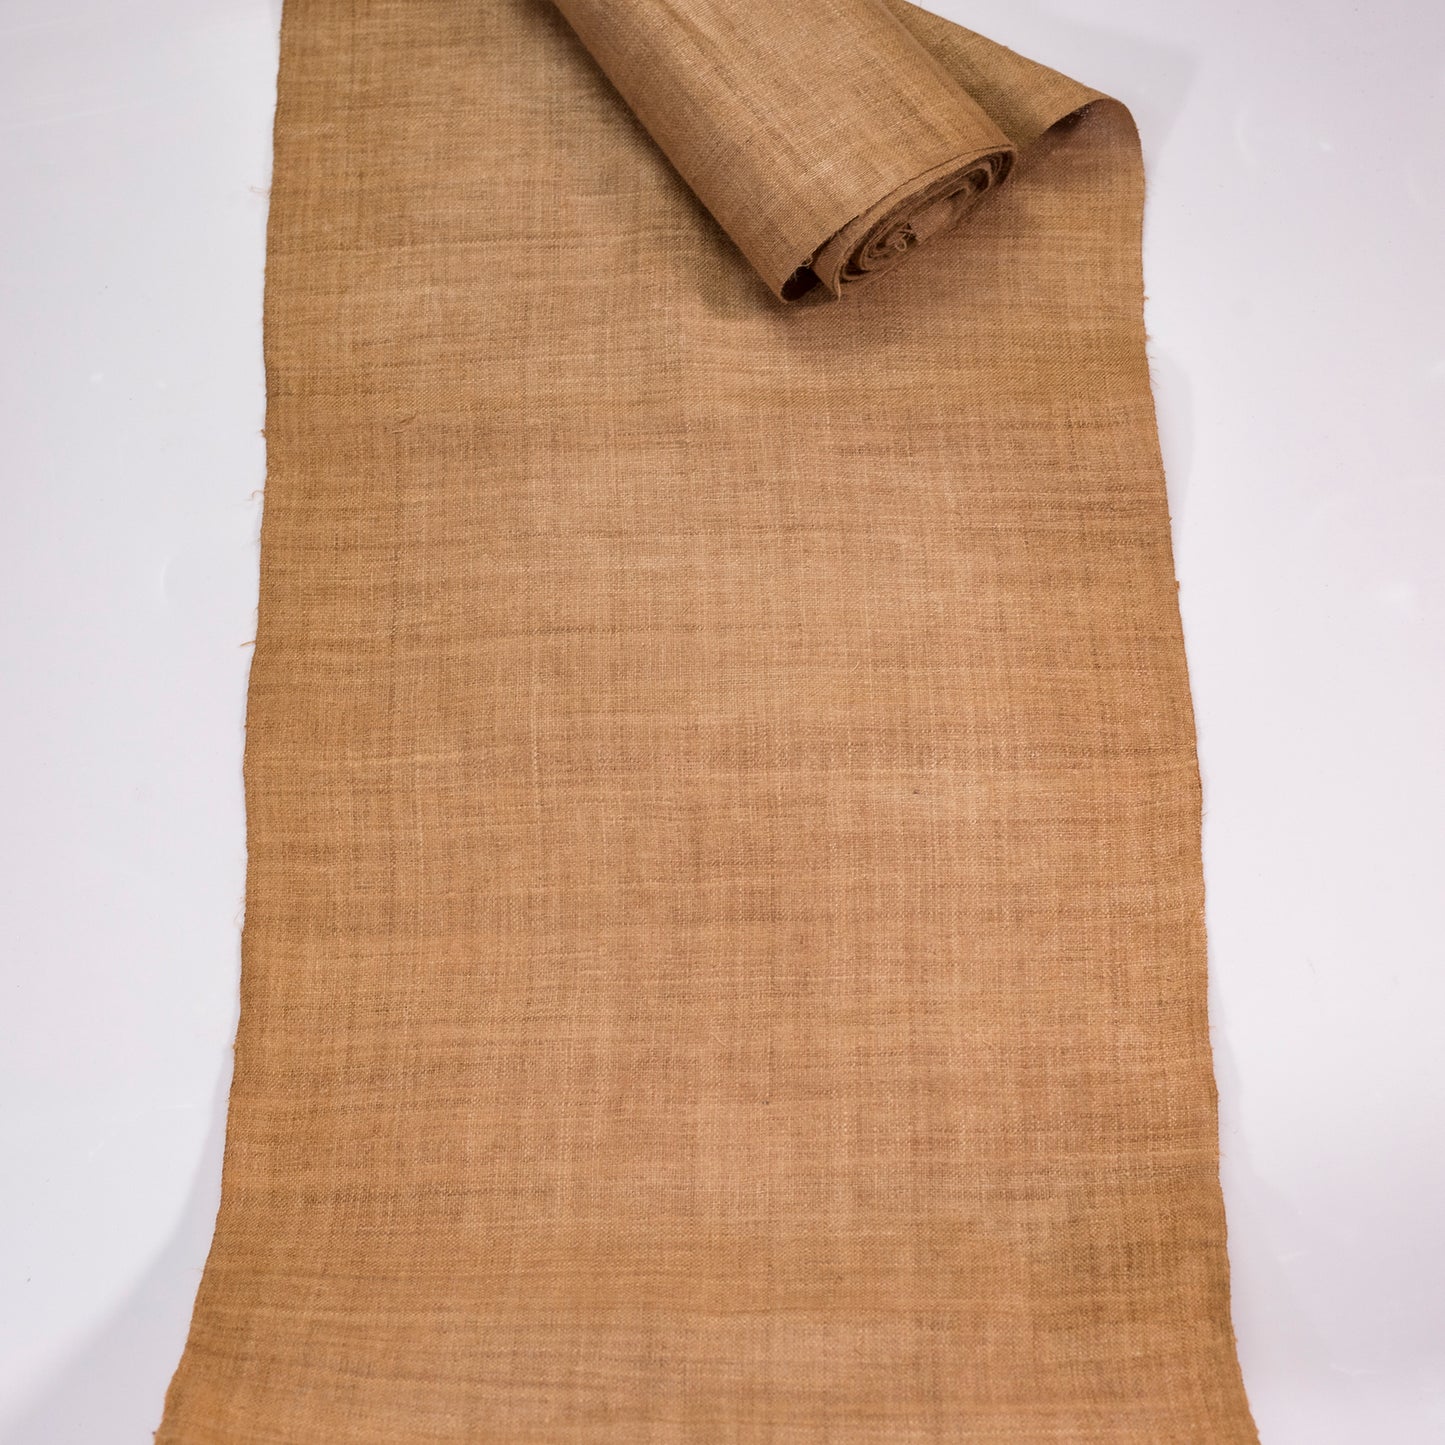 Raw hemp fabric, natural color in LIGHT SEPIA BROWN